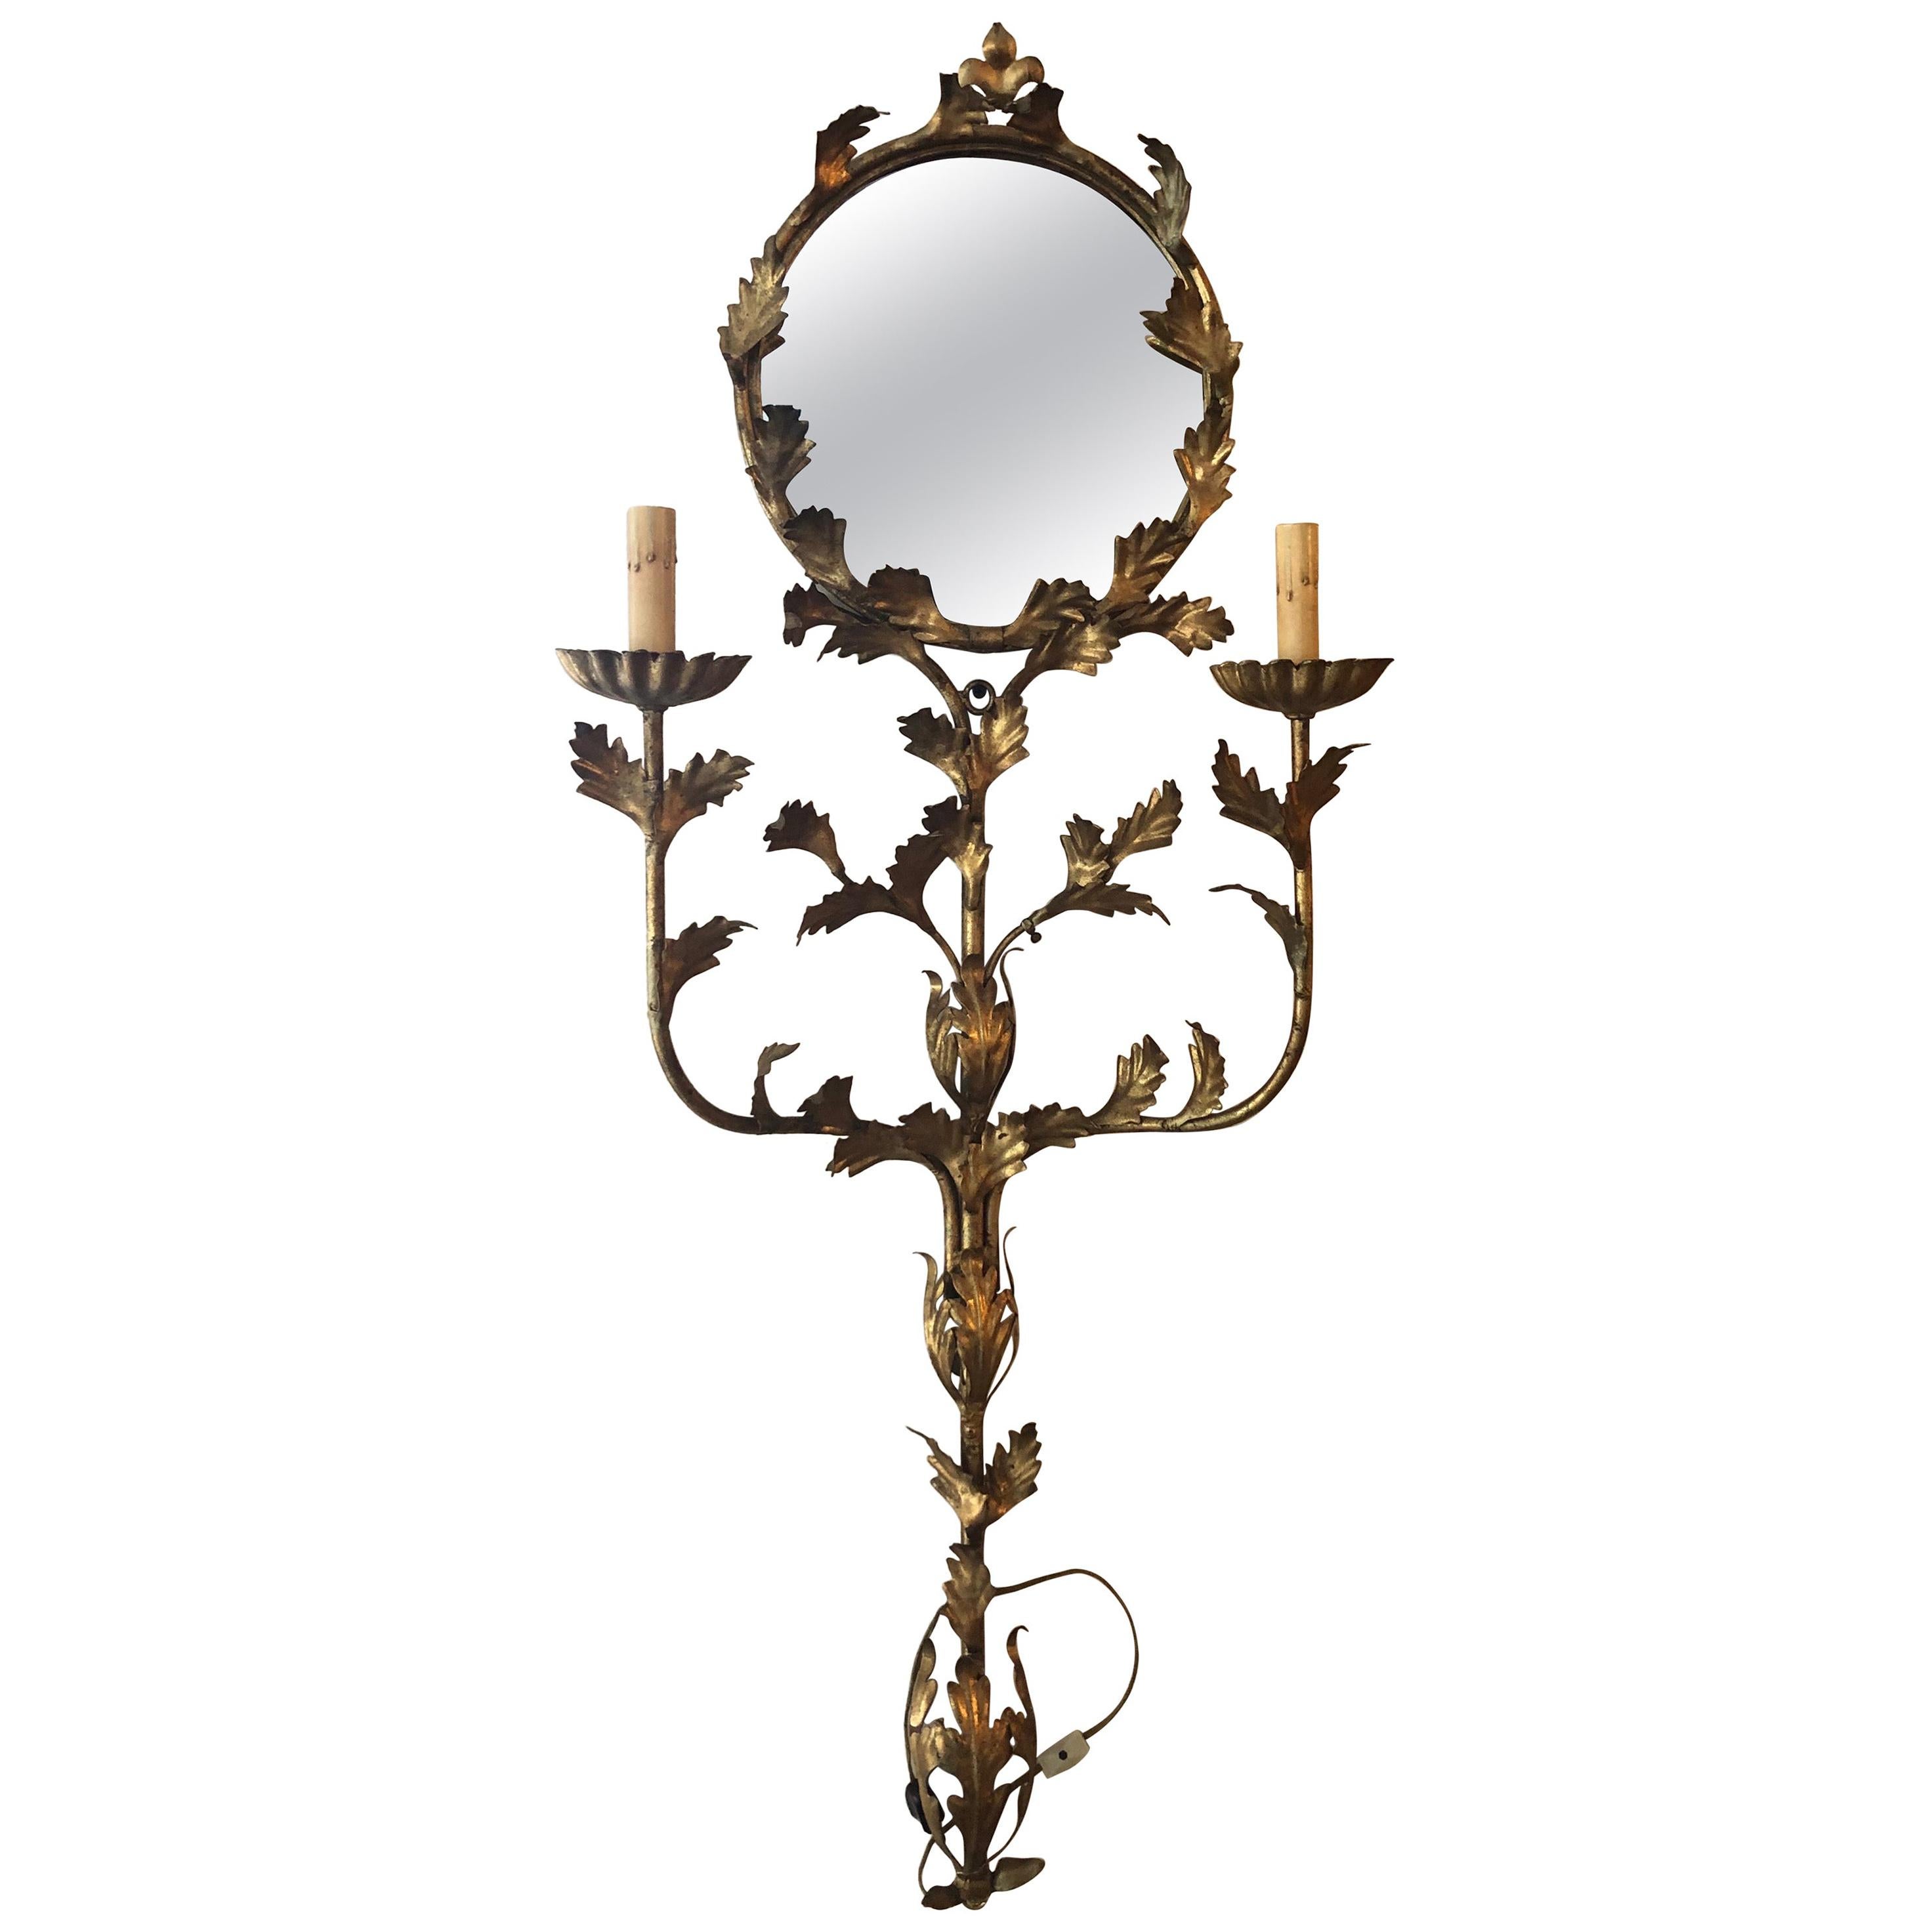 Italian Floral Gilt Iron Mirrored Wall Sconce